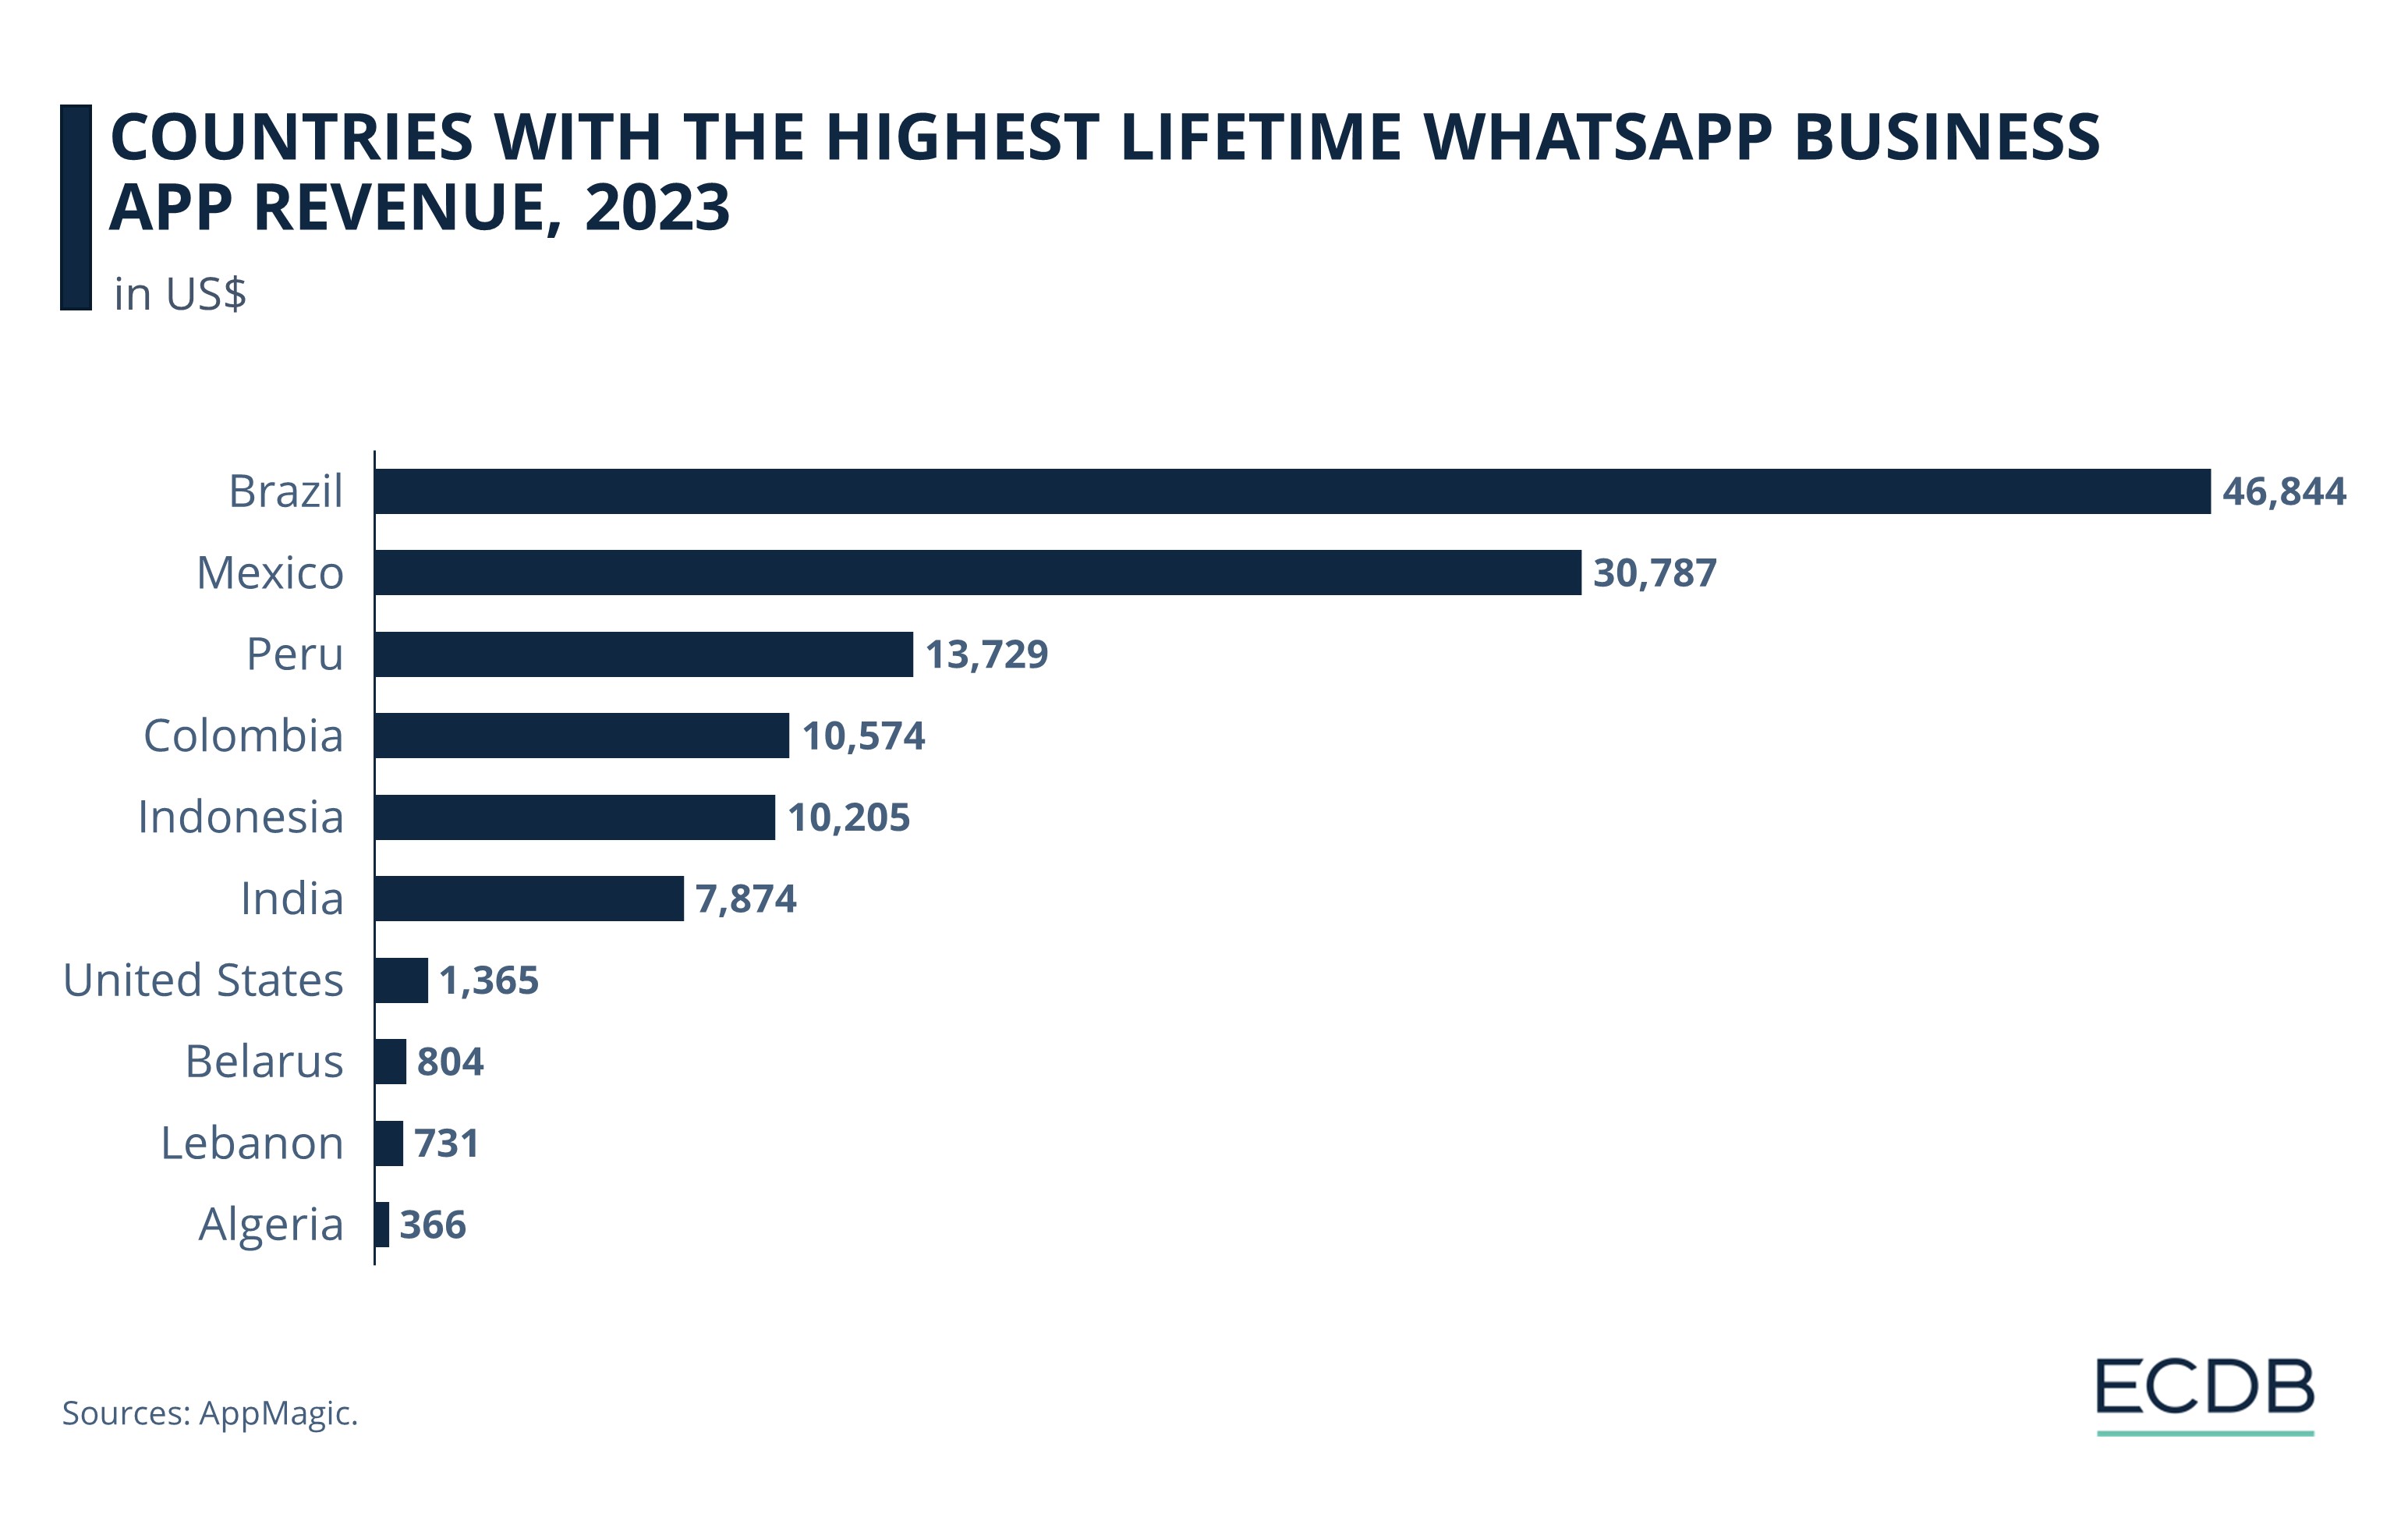 Countries with the Highest Lifetime WhatsApp Business App Revenue, 2023